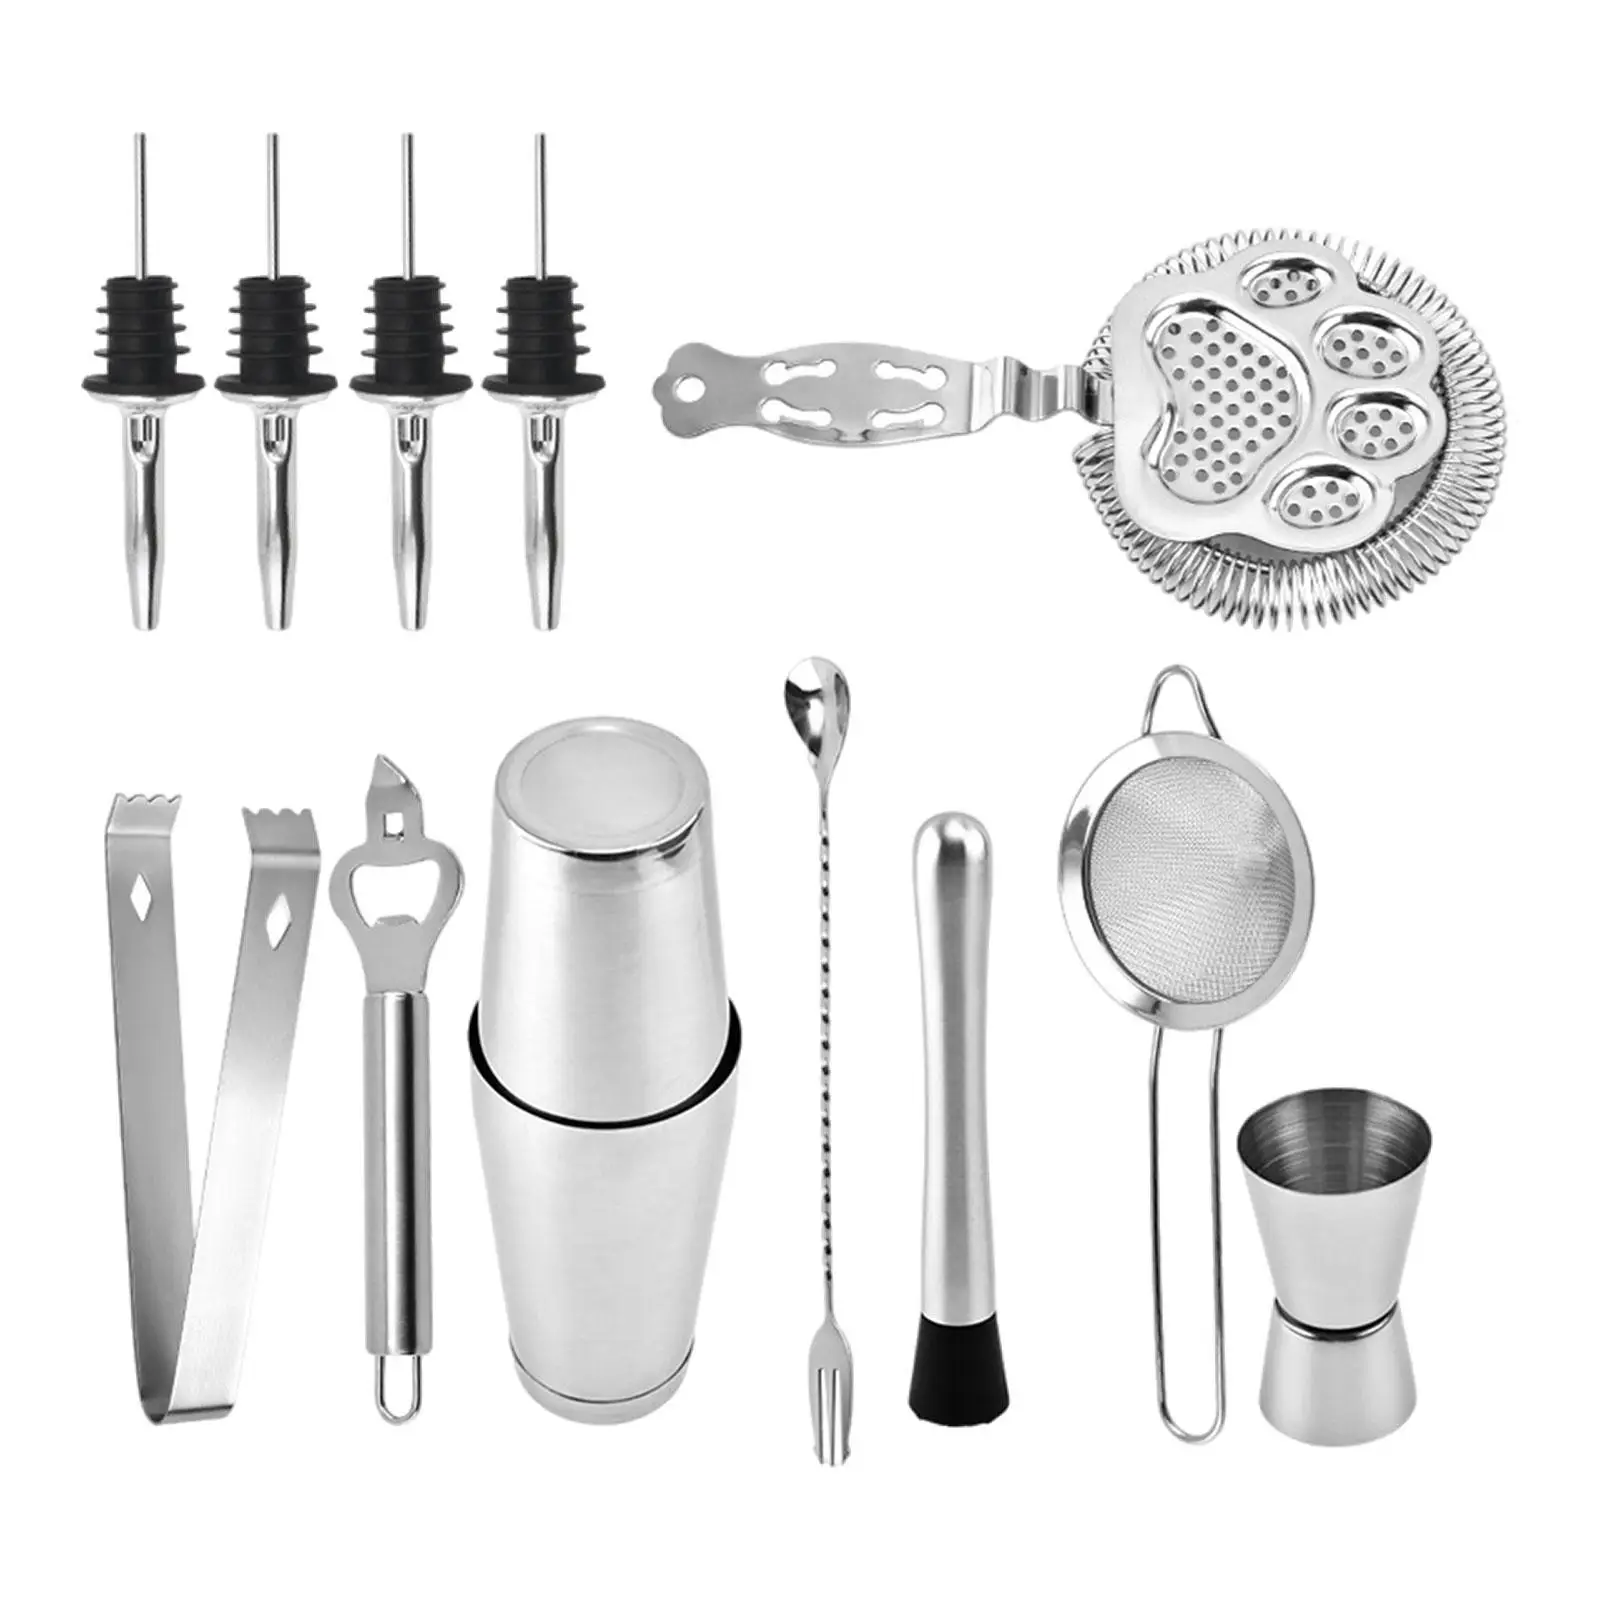 Barware Sets Martini Making Juice Making Kits for Bar Accessories Drink Home